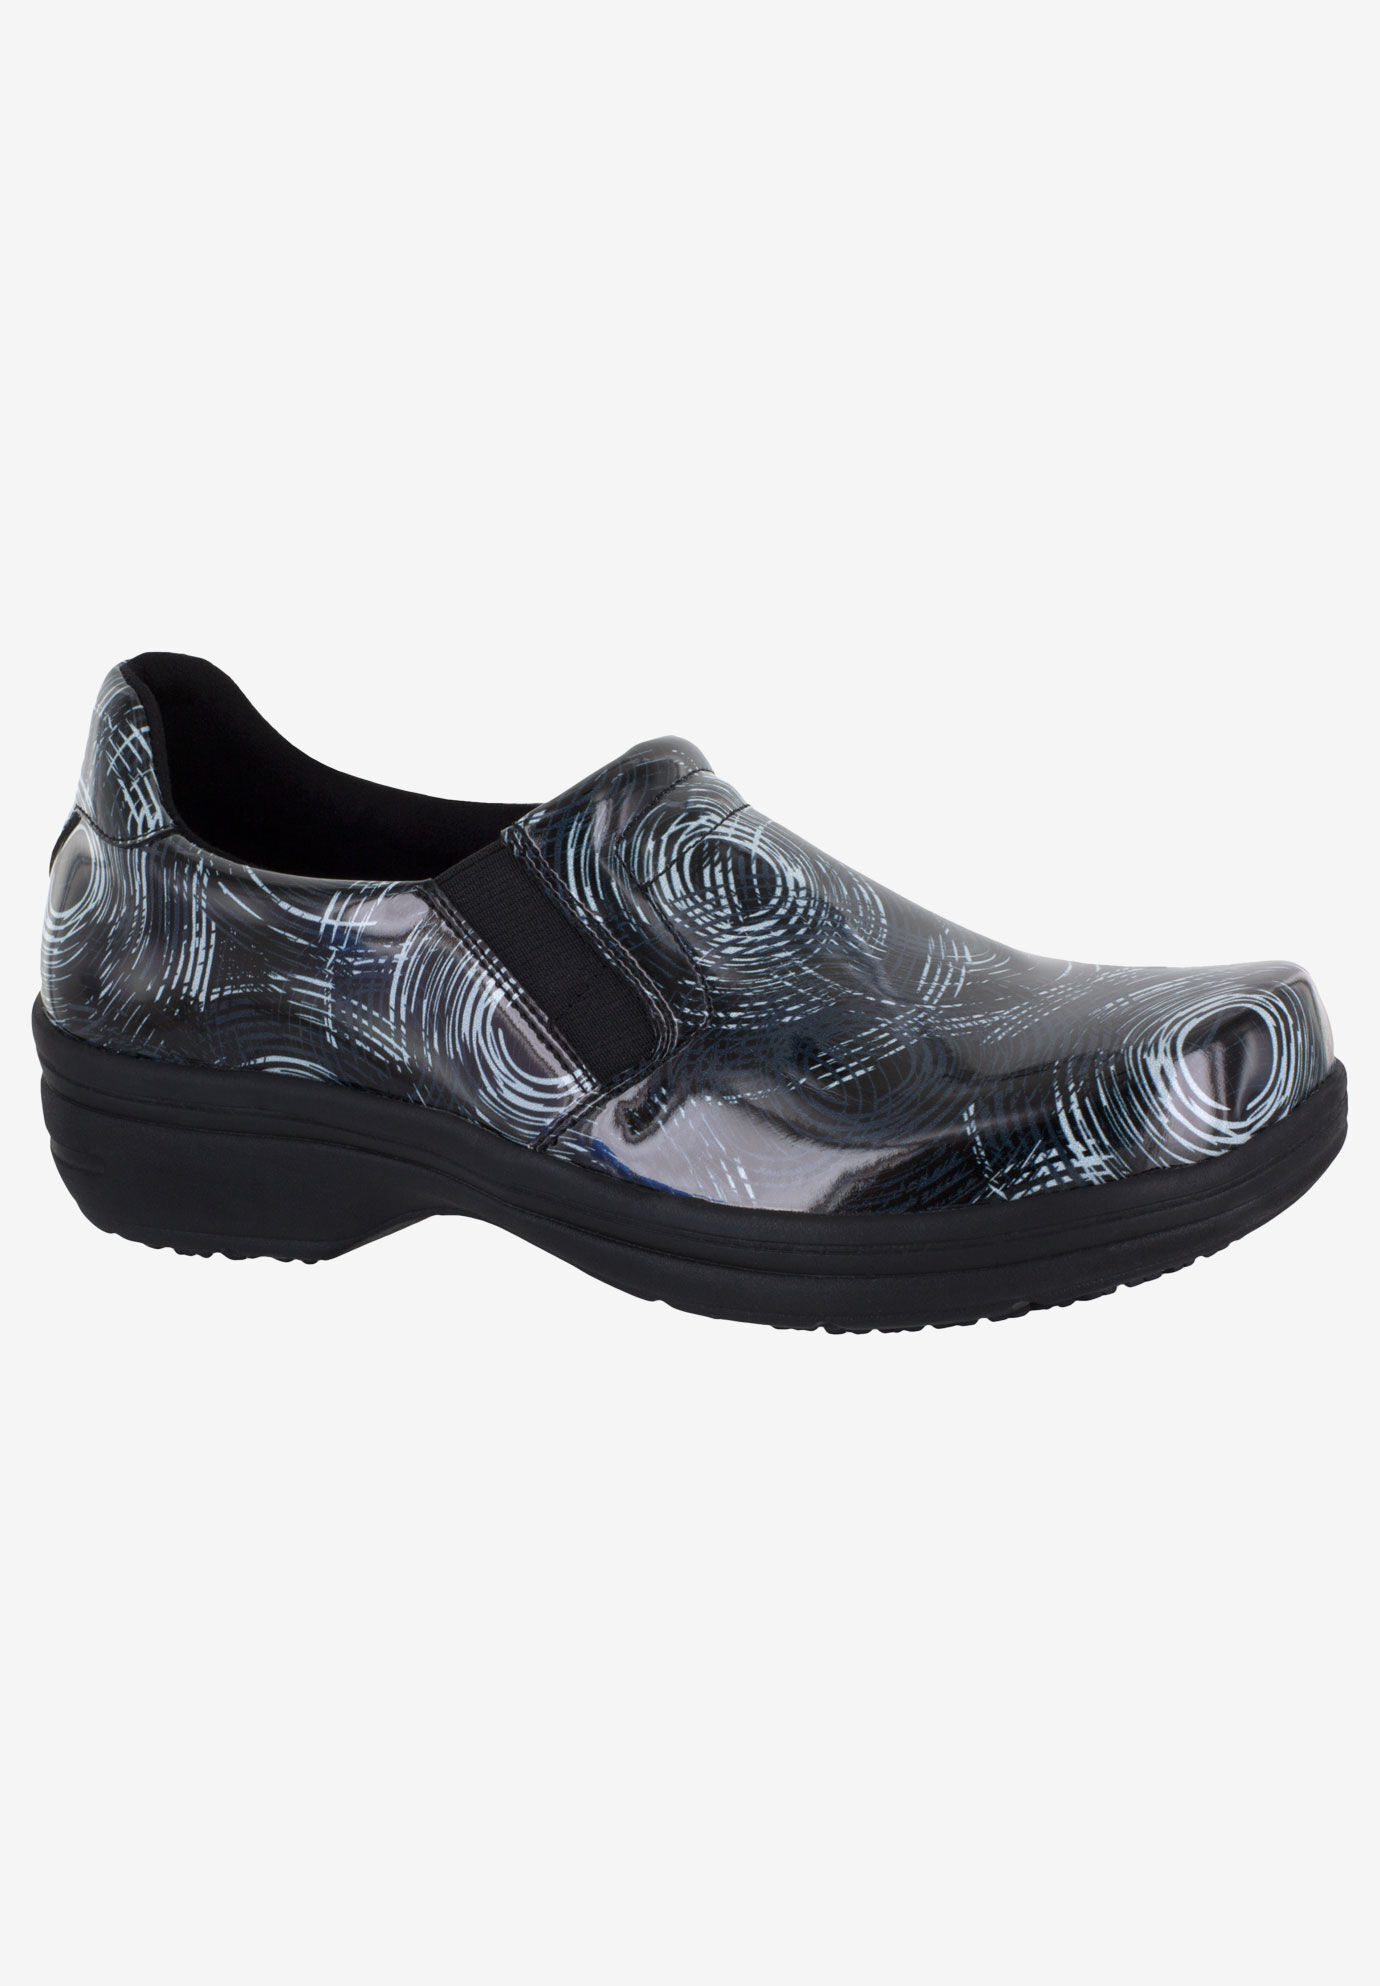 Extra Wide Width Women's Bind Slip-Ons by Easy Works by Easy Street® in Black Grey Abstract (Size 7 WW)